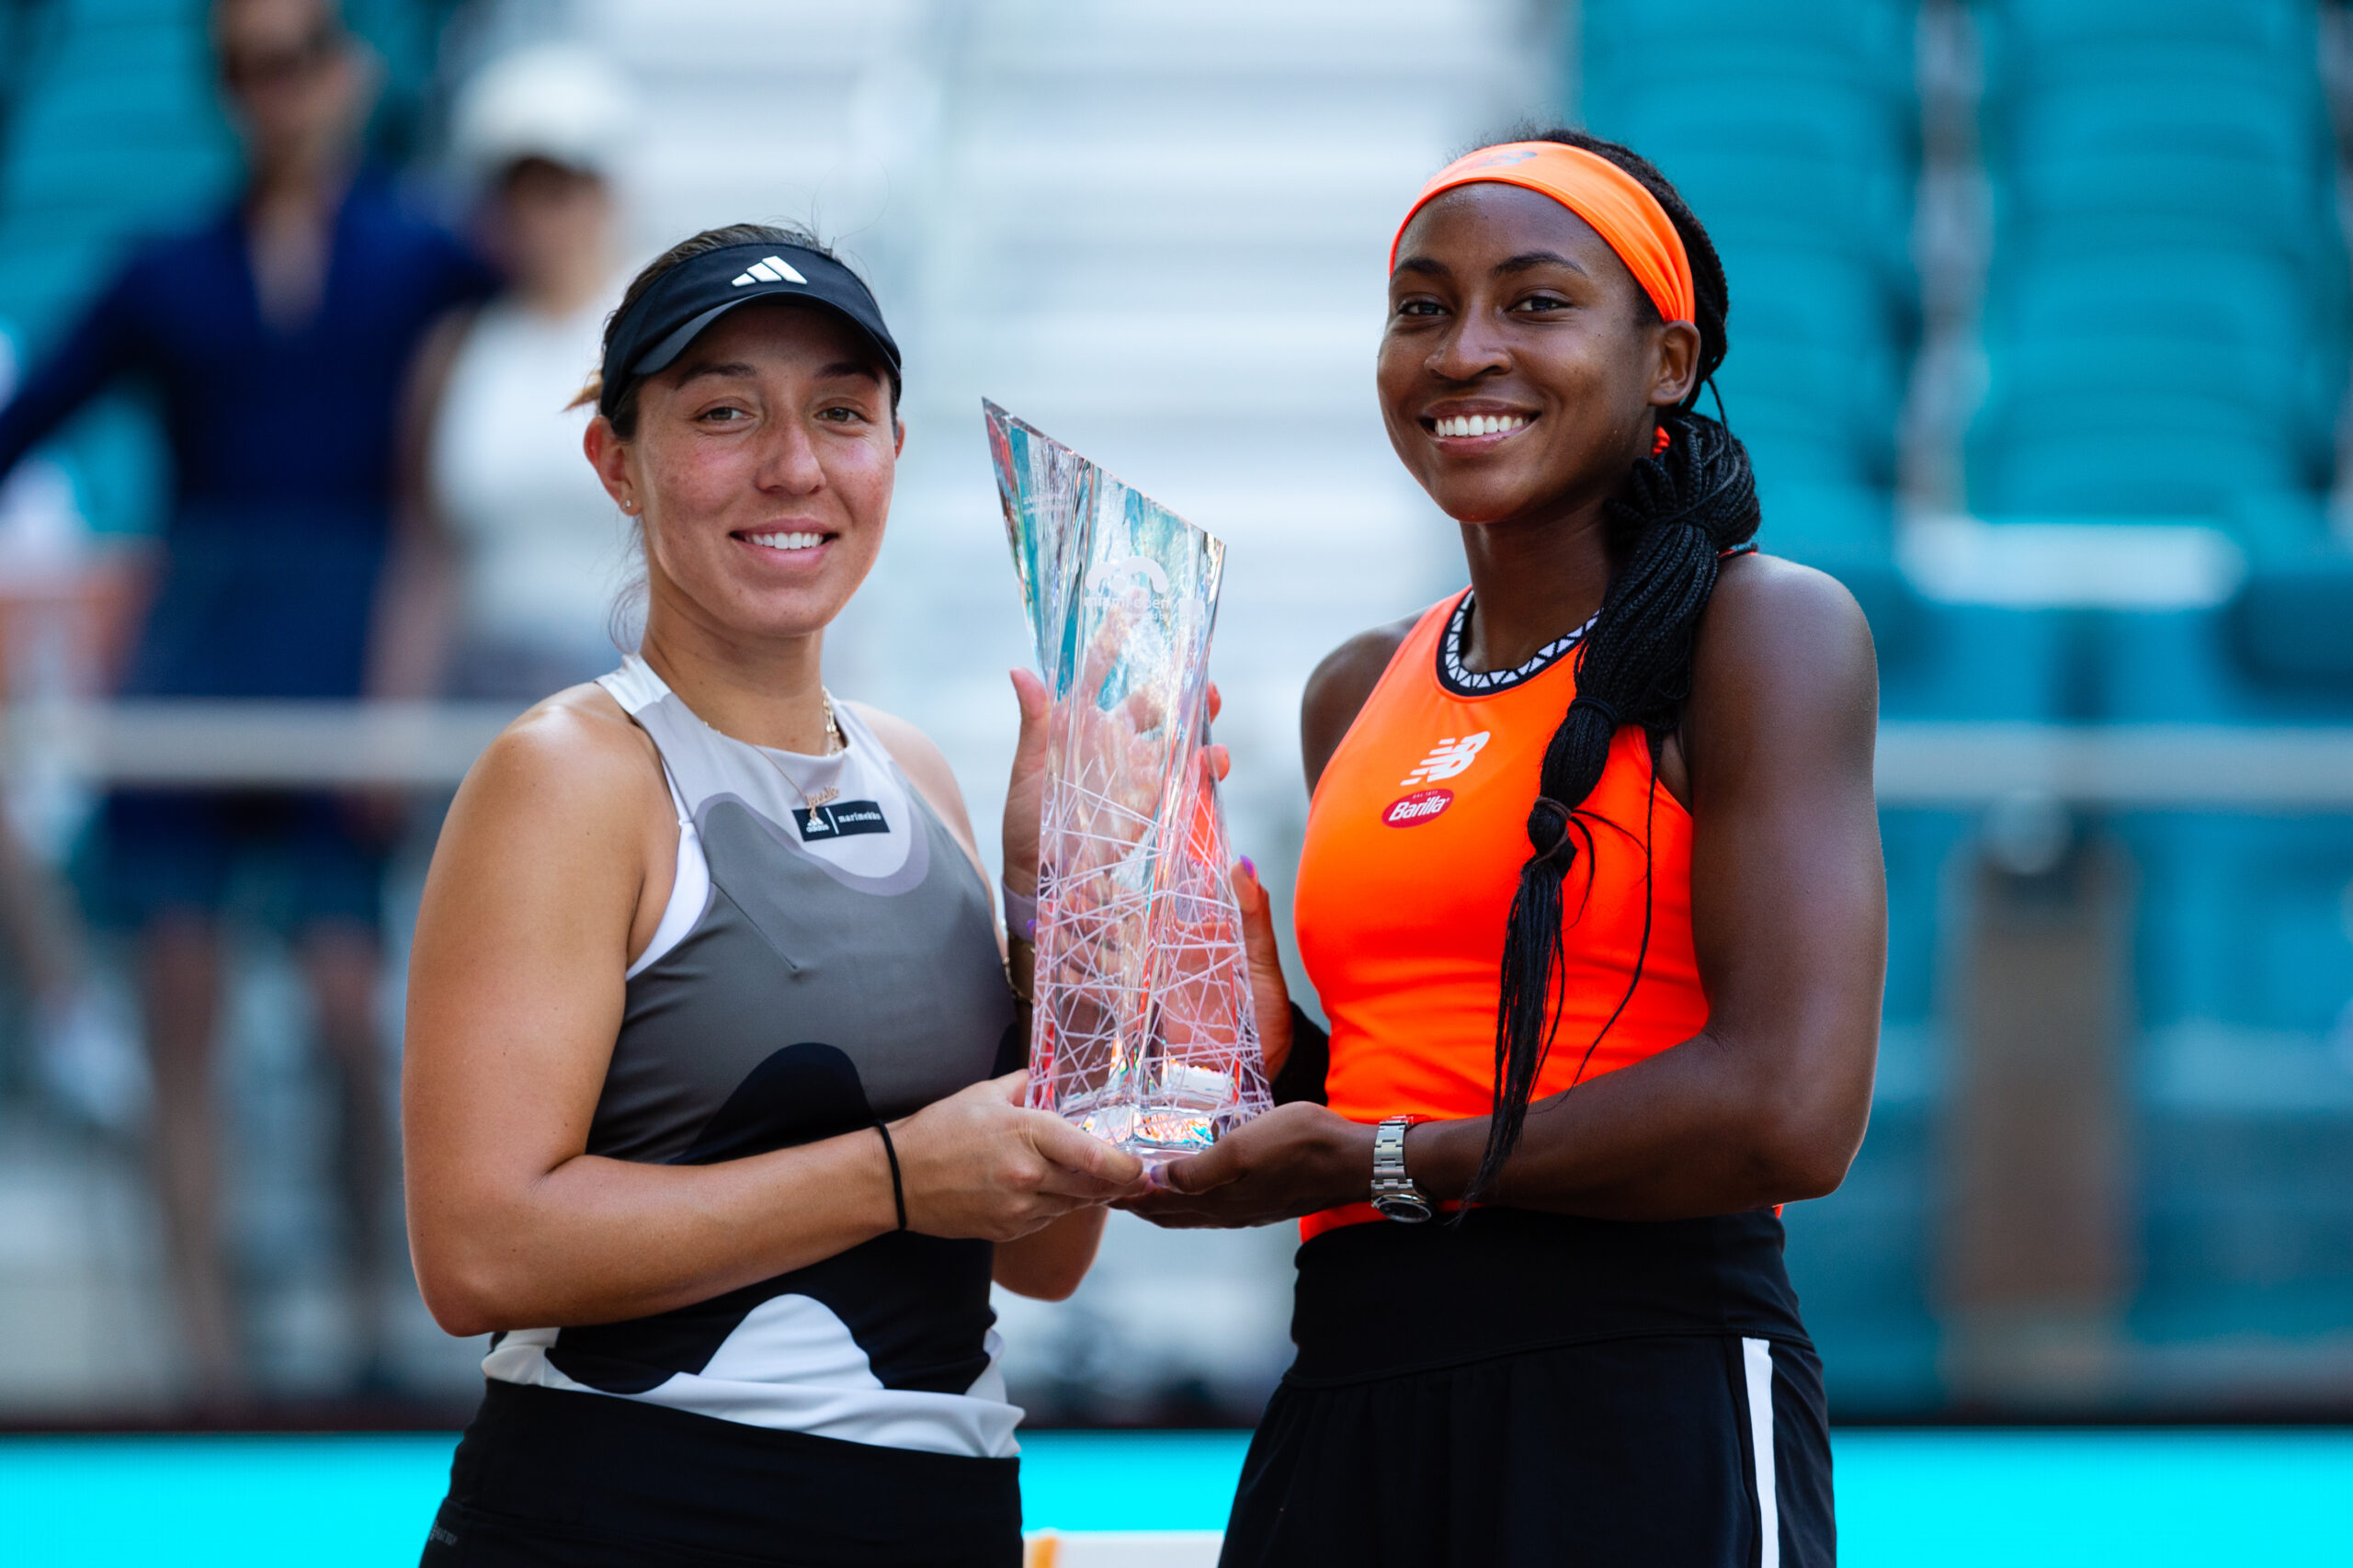 Jessica Pegula and Coco Gauff, Women's Doubles Champions at the 2023 Miami Open hold their trophy.